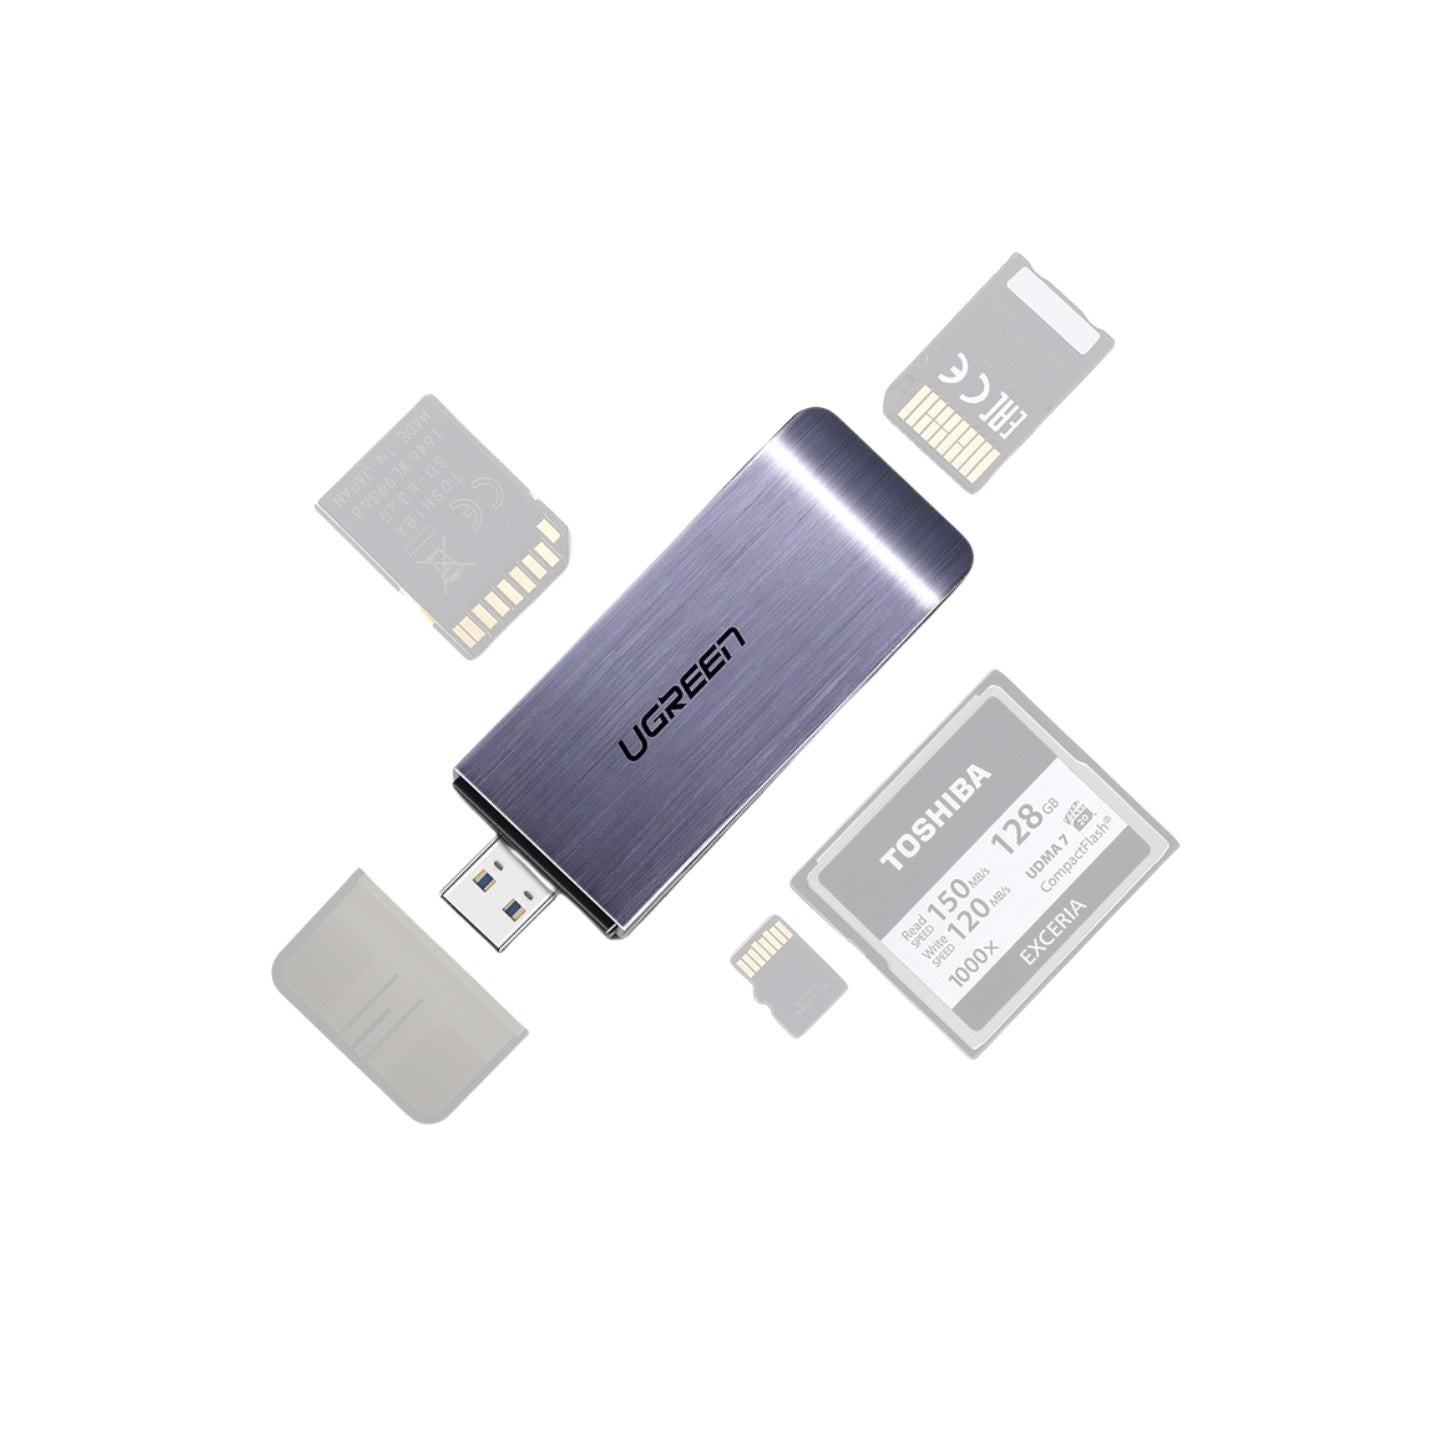 UGREEN 4-in-1 Multifunction Card Reader USB-A 3.0 to TF / SD / CF / MS with 5Gbps Transfer Speed | 50541